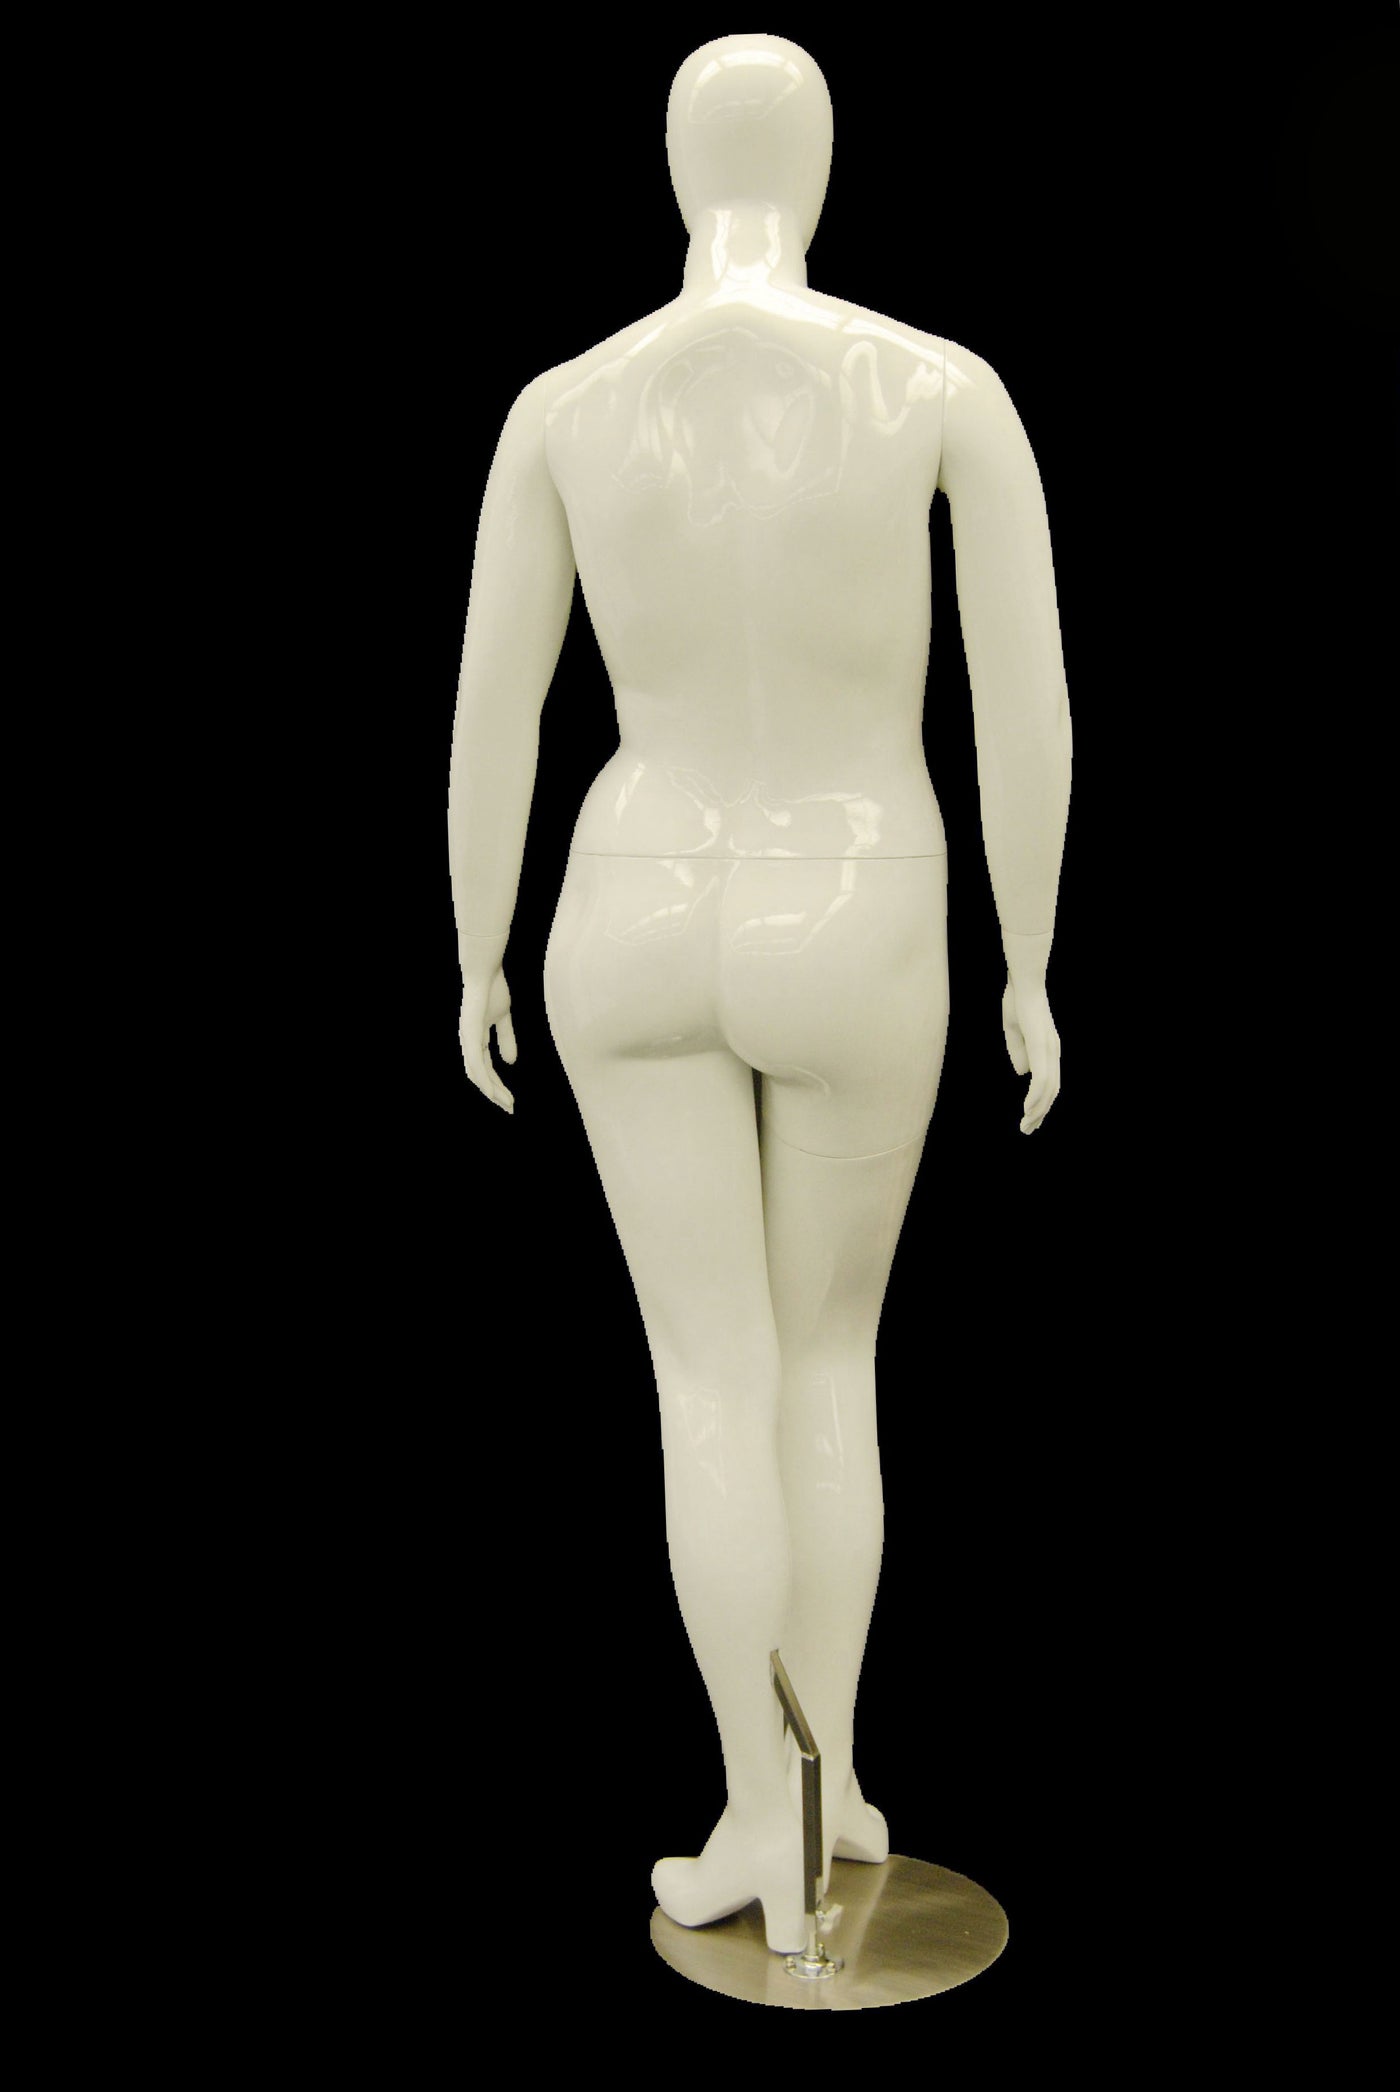 Lizzy: Plus Size Headless Female Mannequin in Glossy White